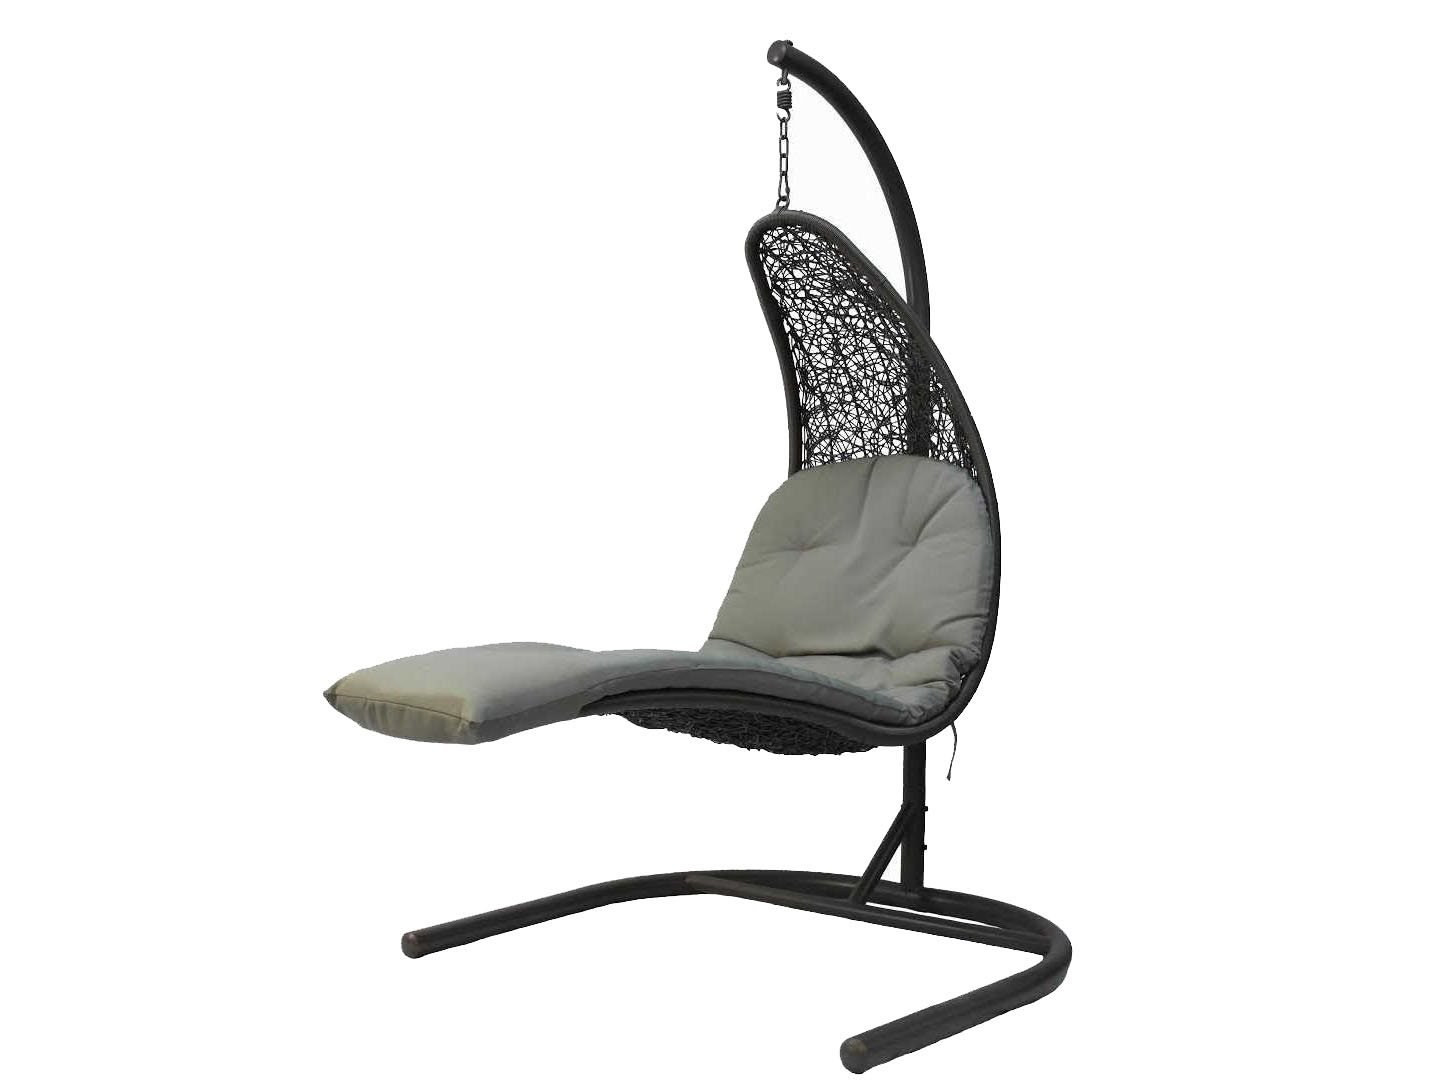 Schnupp Patio Cloud Wicker Swing Chair with Stand 36